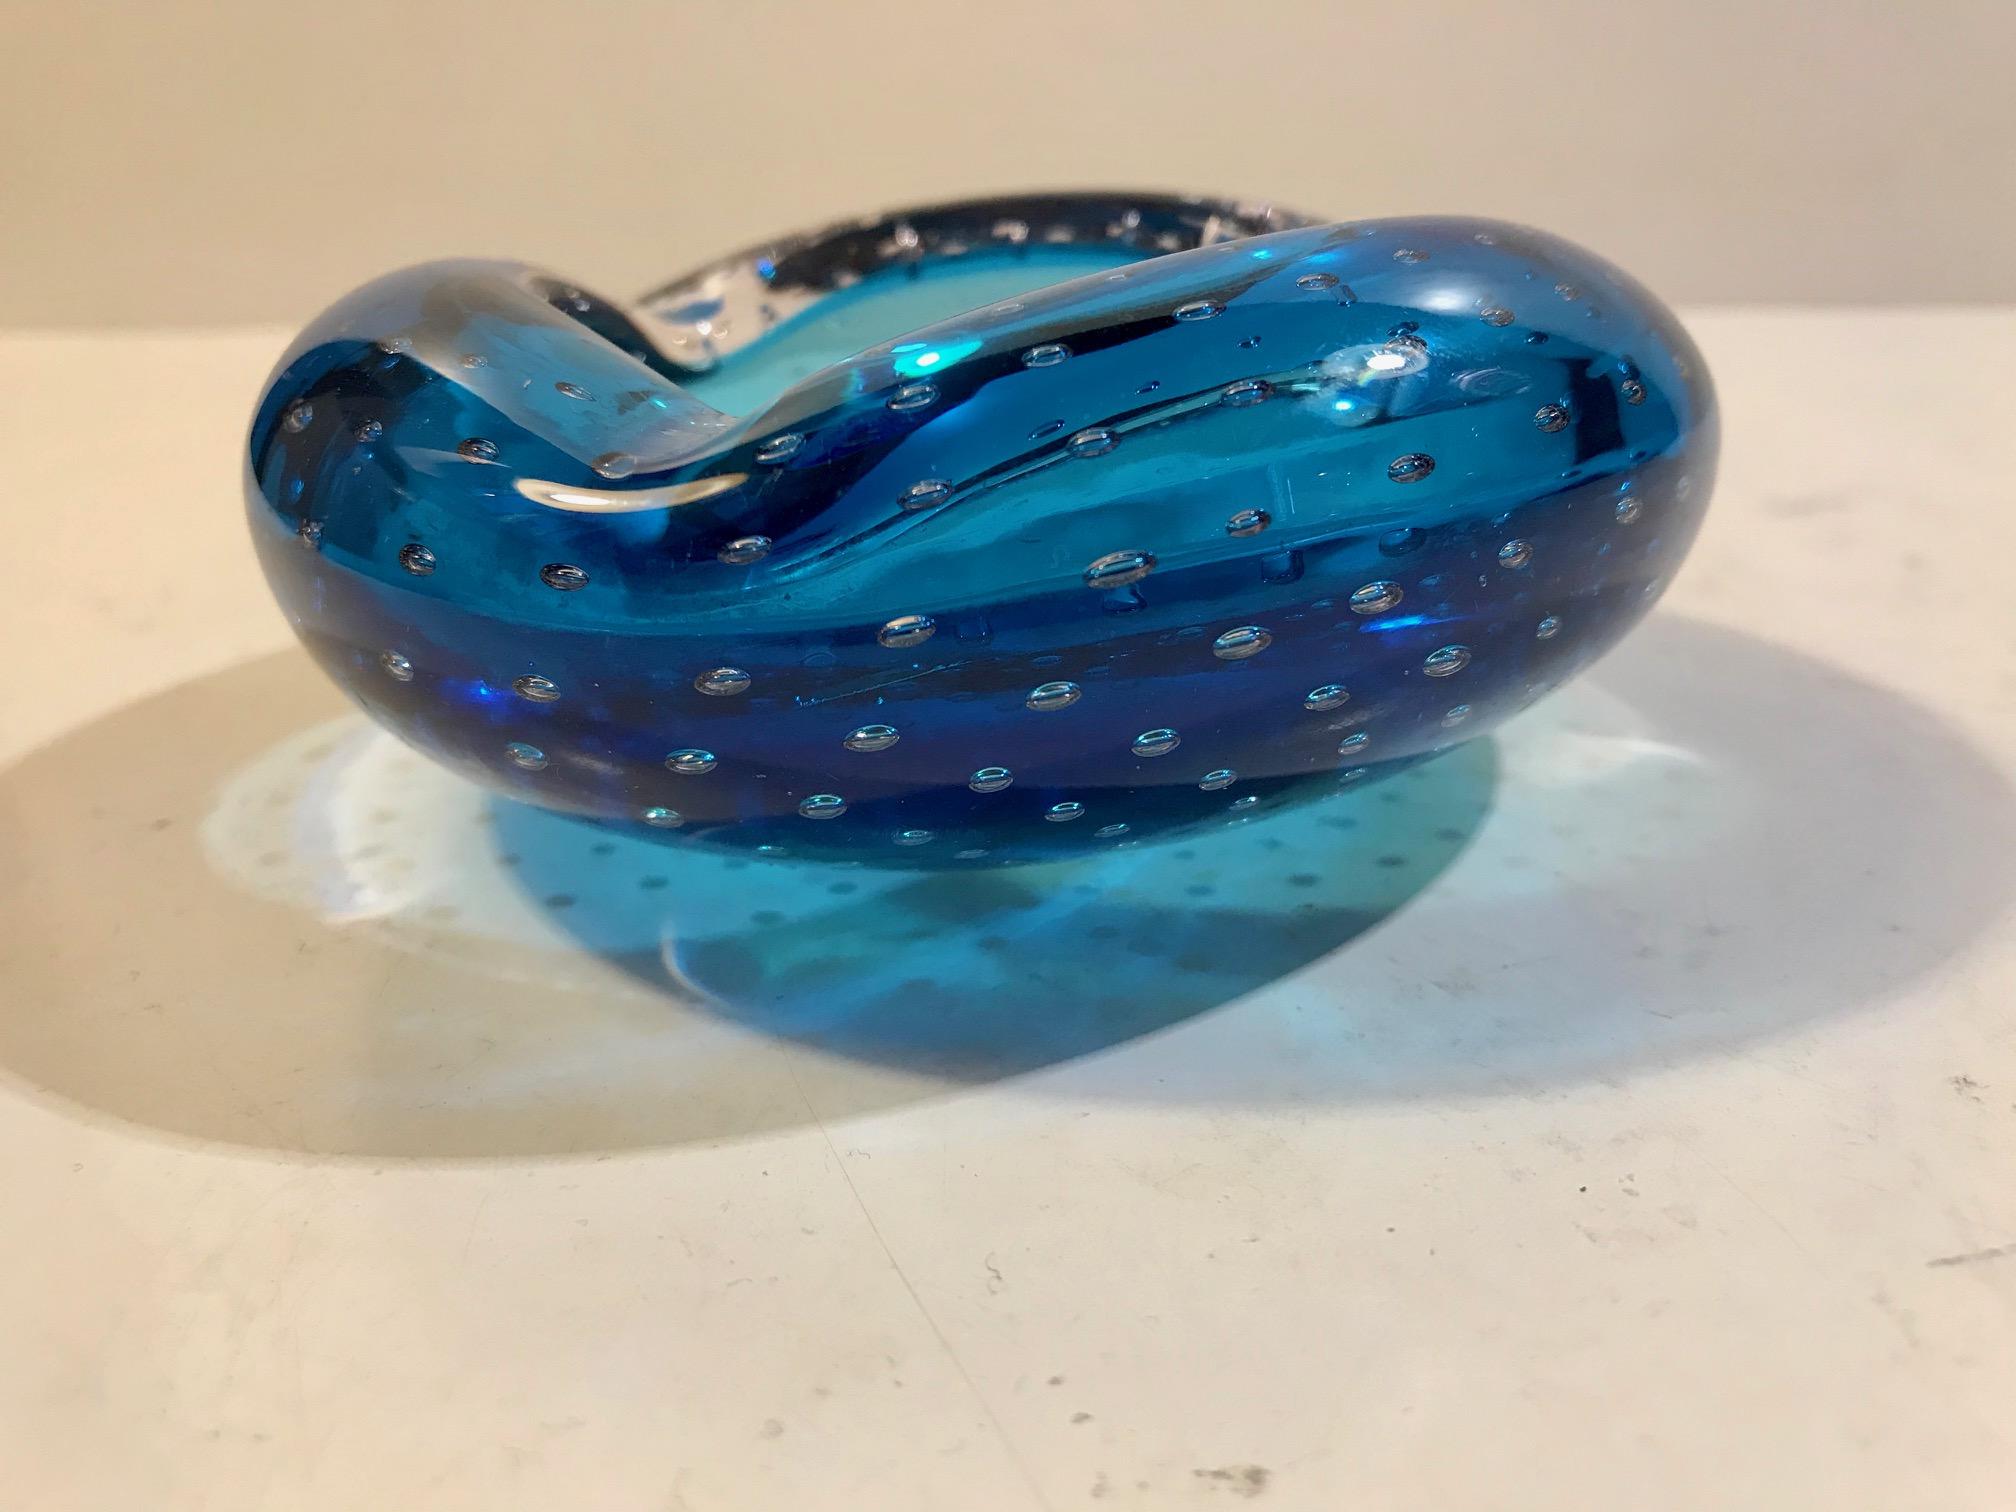 Hand blown cobalt blue collapsed Murano art glass bowl or ashtray. Executed with incapsulated and controlled air bubbles. It is attributed to Archimede Seguso, Italy, circa 1940s-1950s.